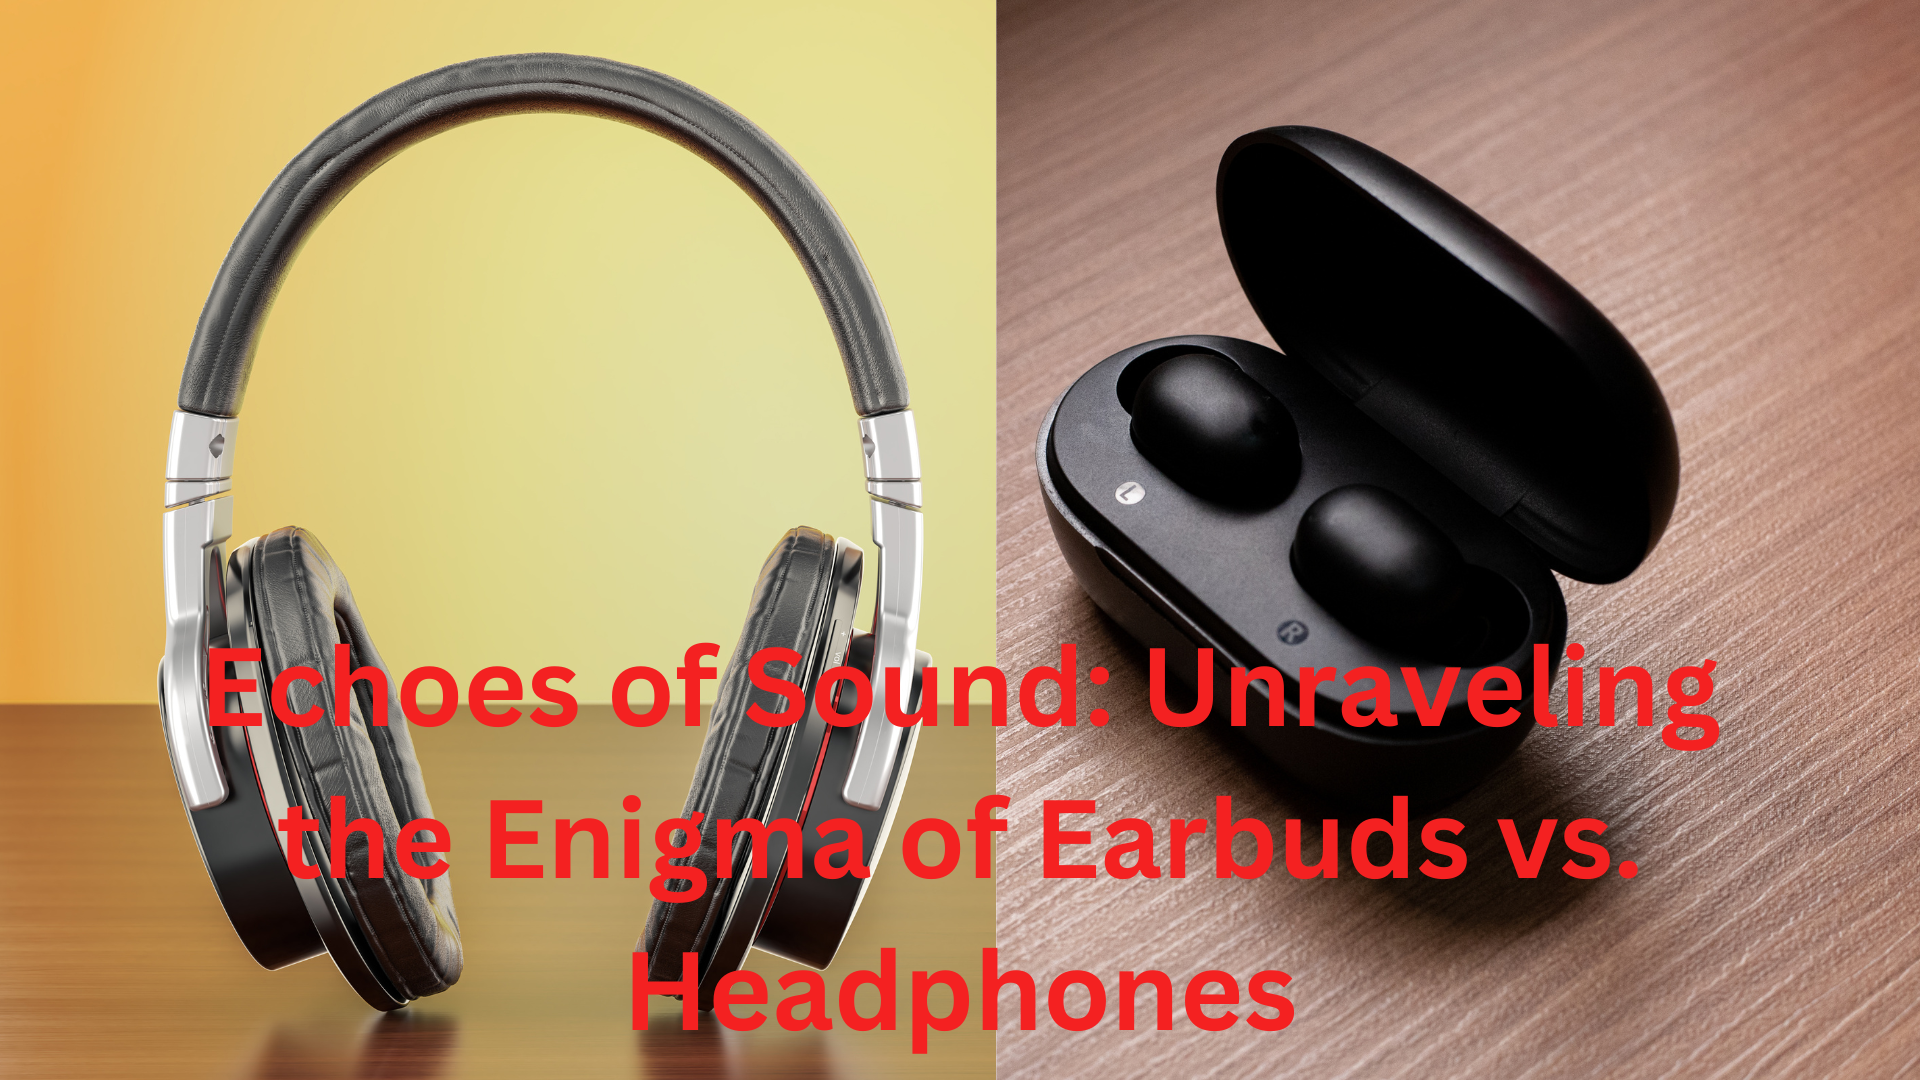 Echoes of Sound Unraveling the Enigma of Earbuds vs. Headphones